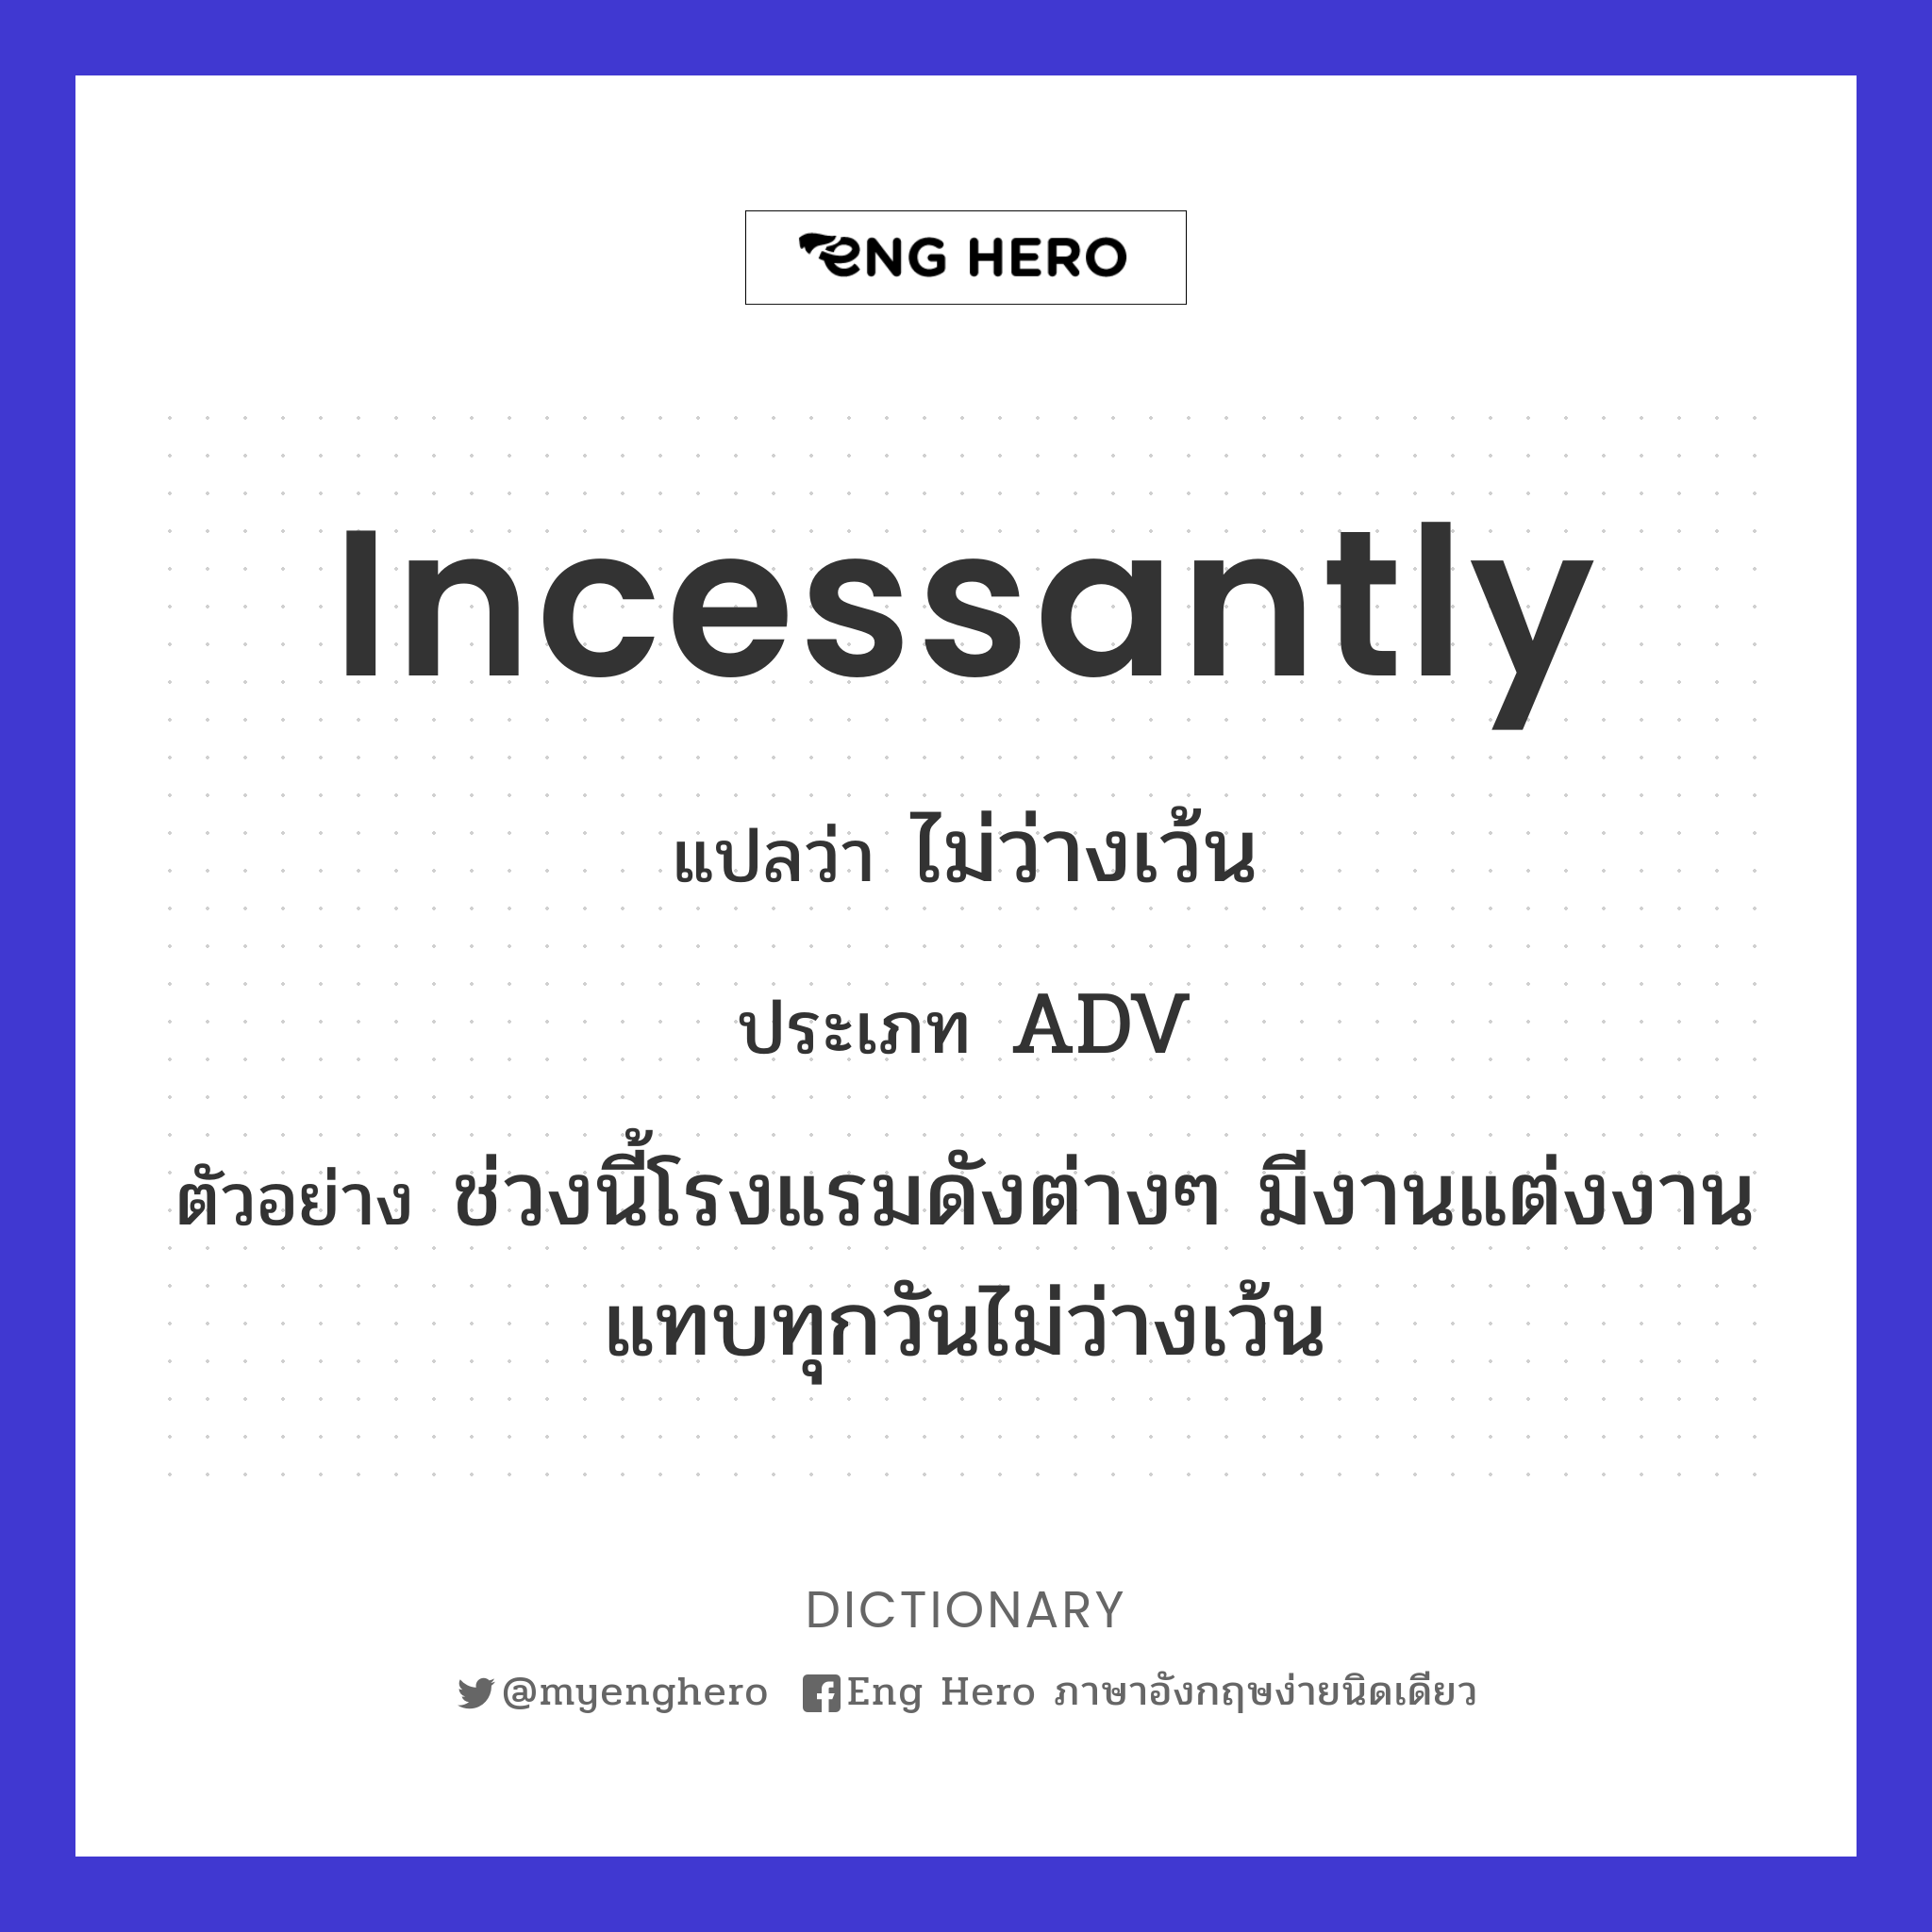 incessantly